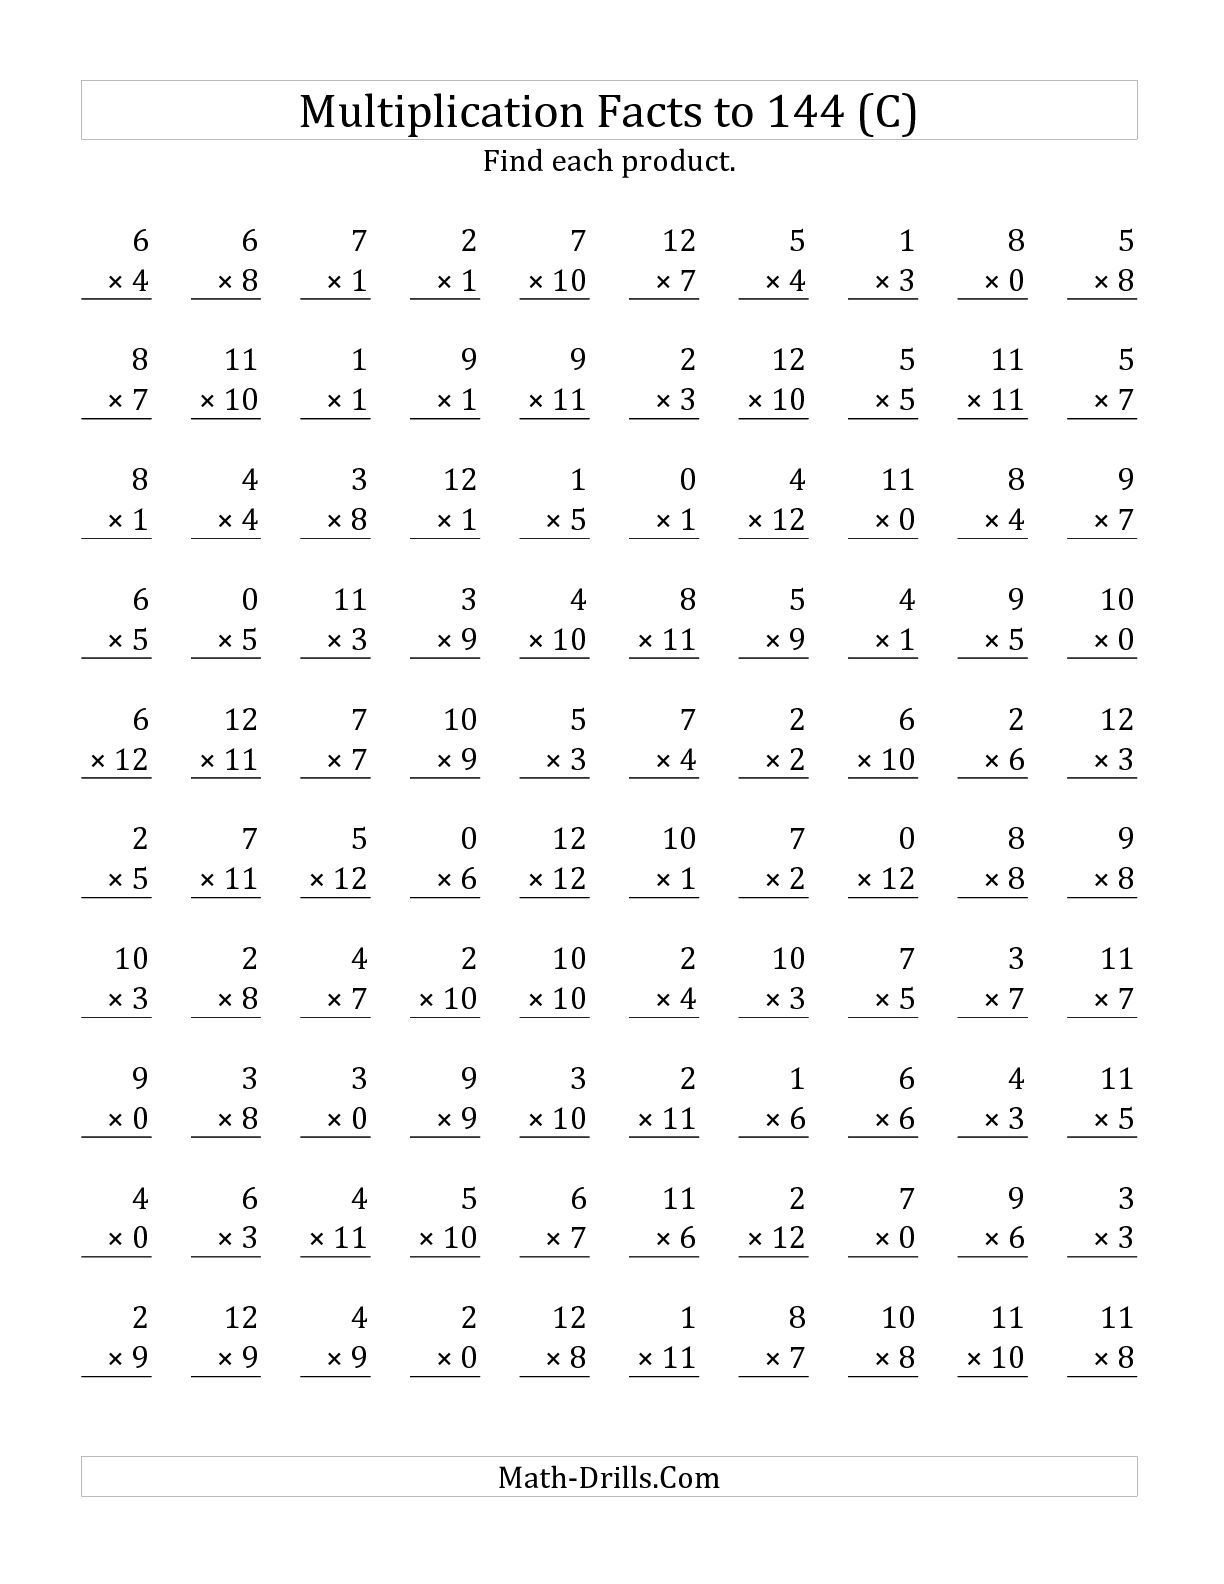 The Multiplication Facts To 144 Including Zeros (C) Math for Printable Multiplication Math Facts